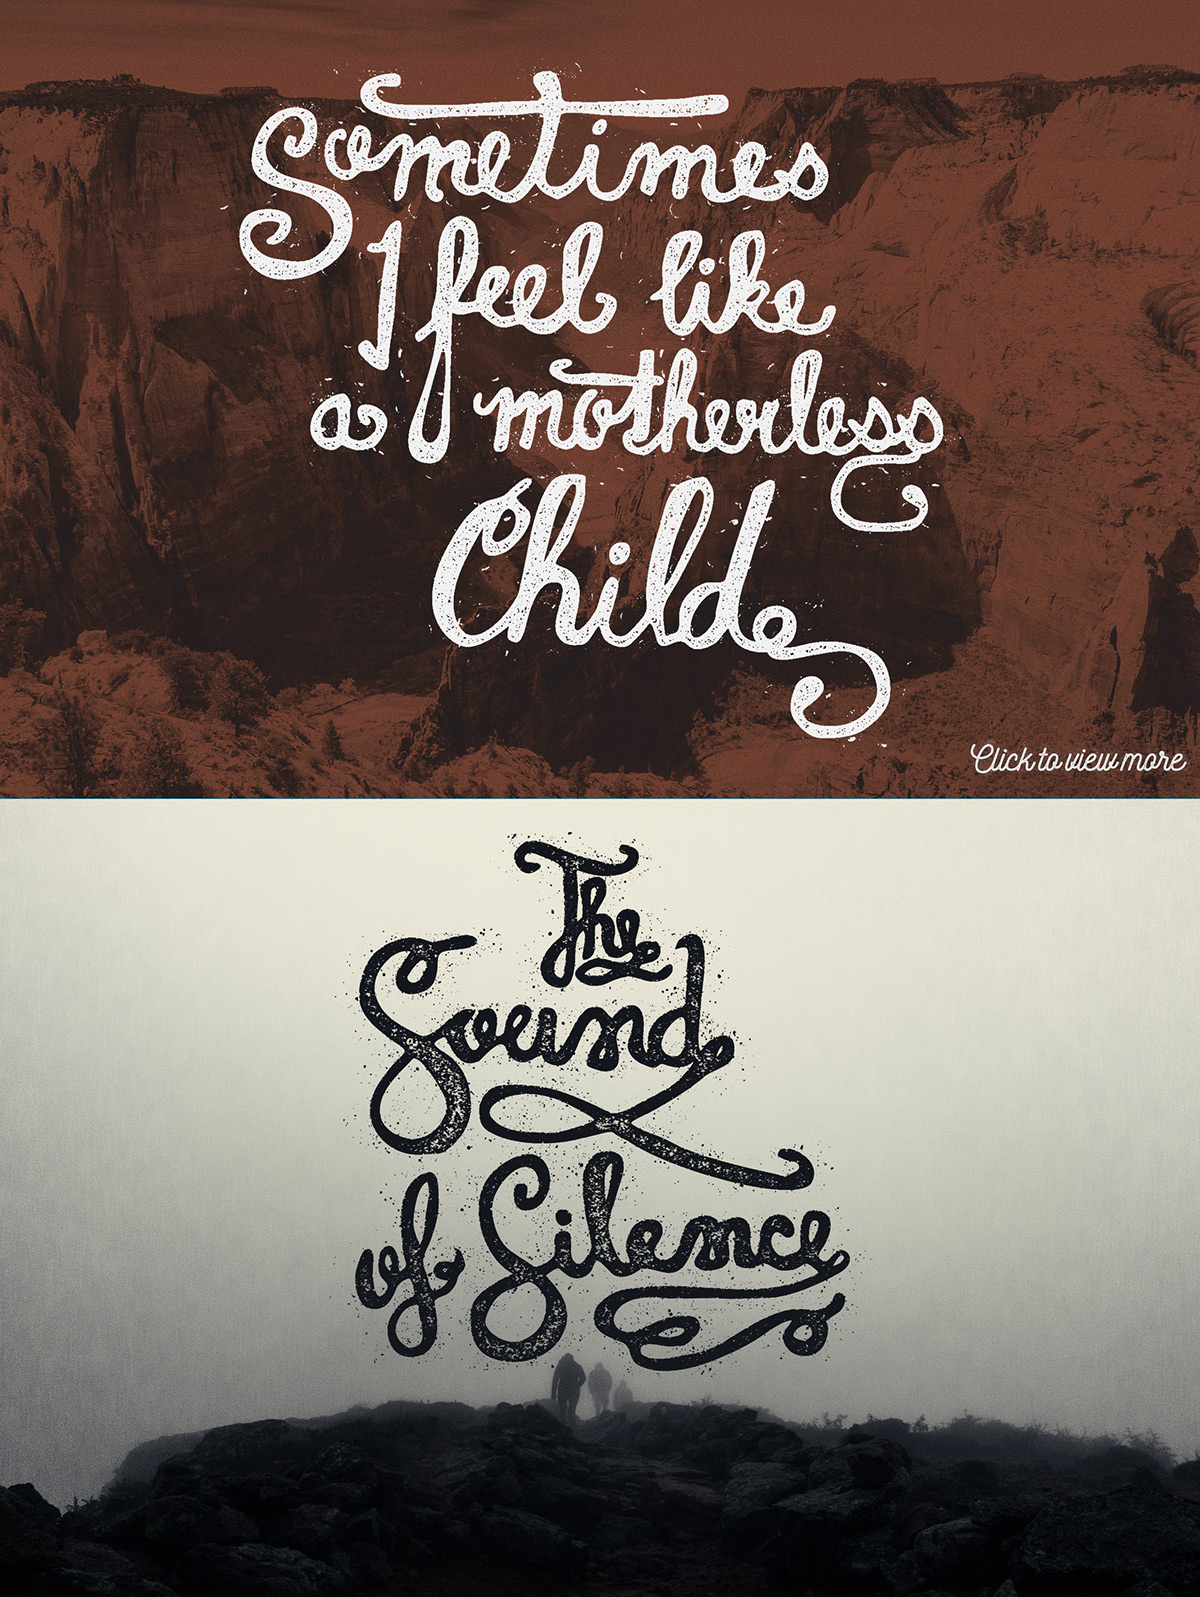 lettering speckles adobe illustrator graphic styles actions textures ink grain vintage Retro inked text effects effects handmade handprinted press